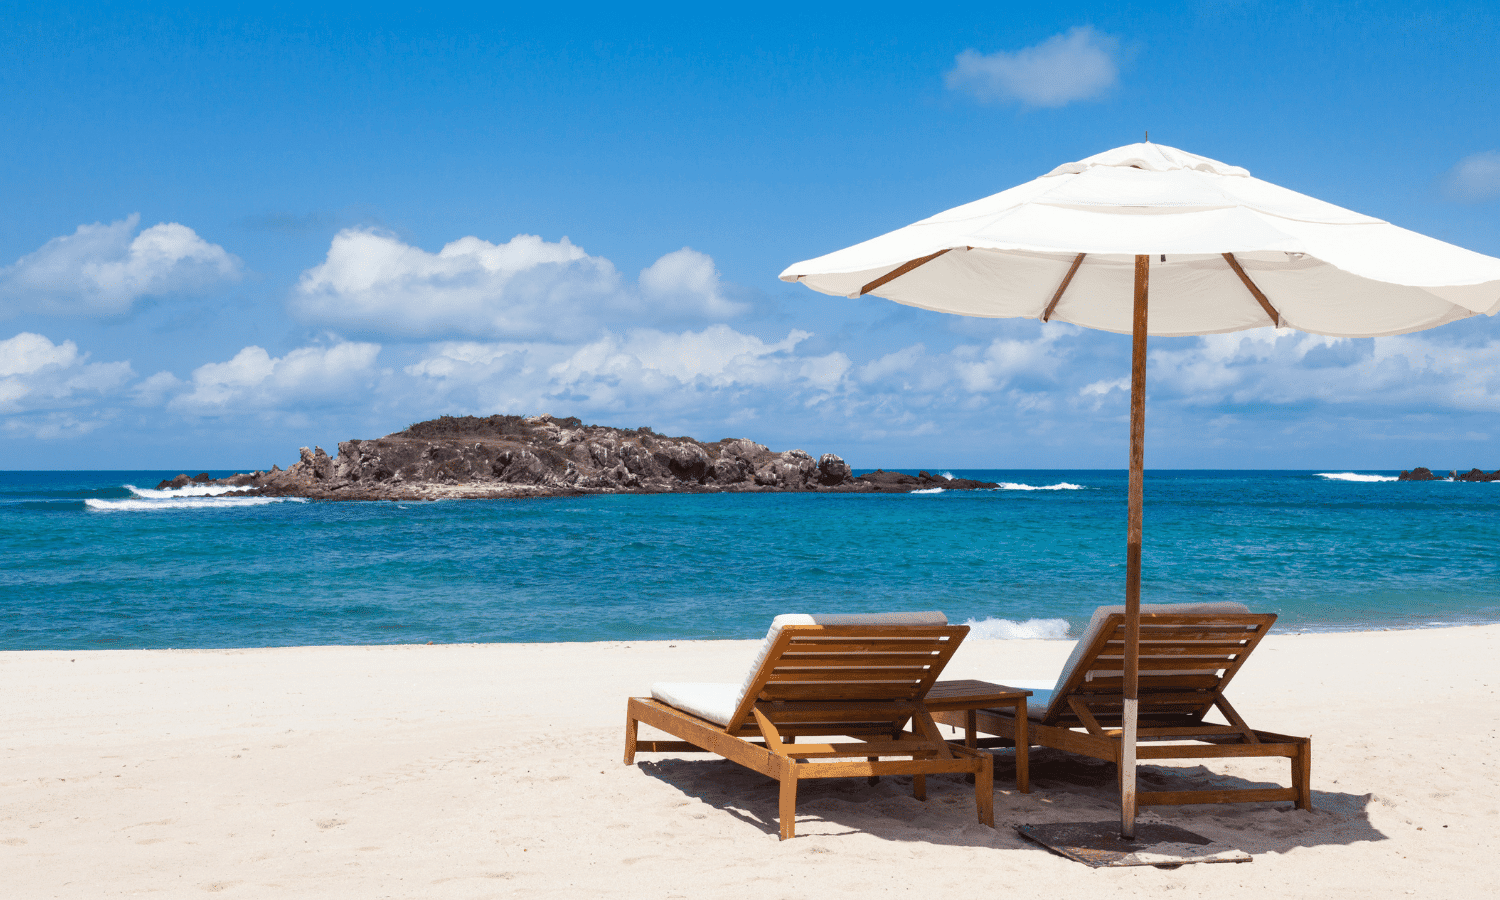 Reasons why You Should Think About Retirement in Mexico